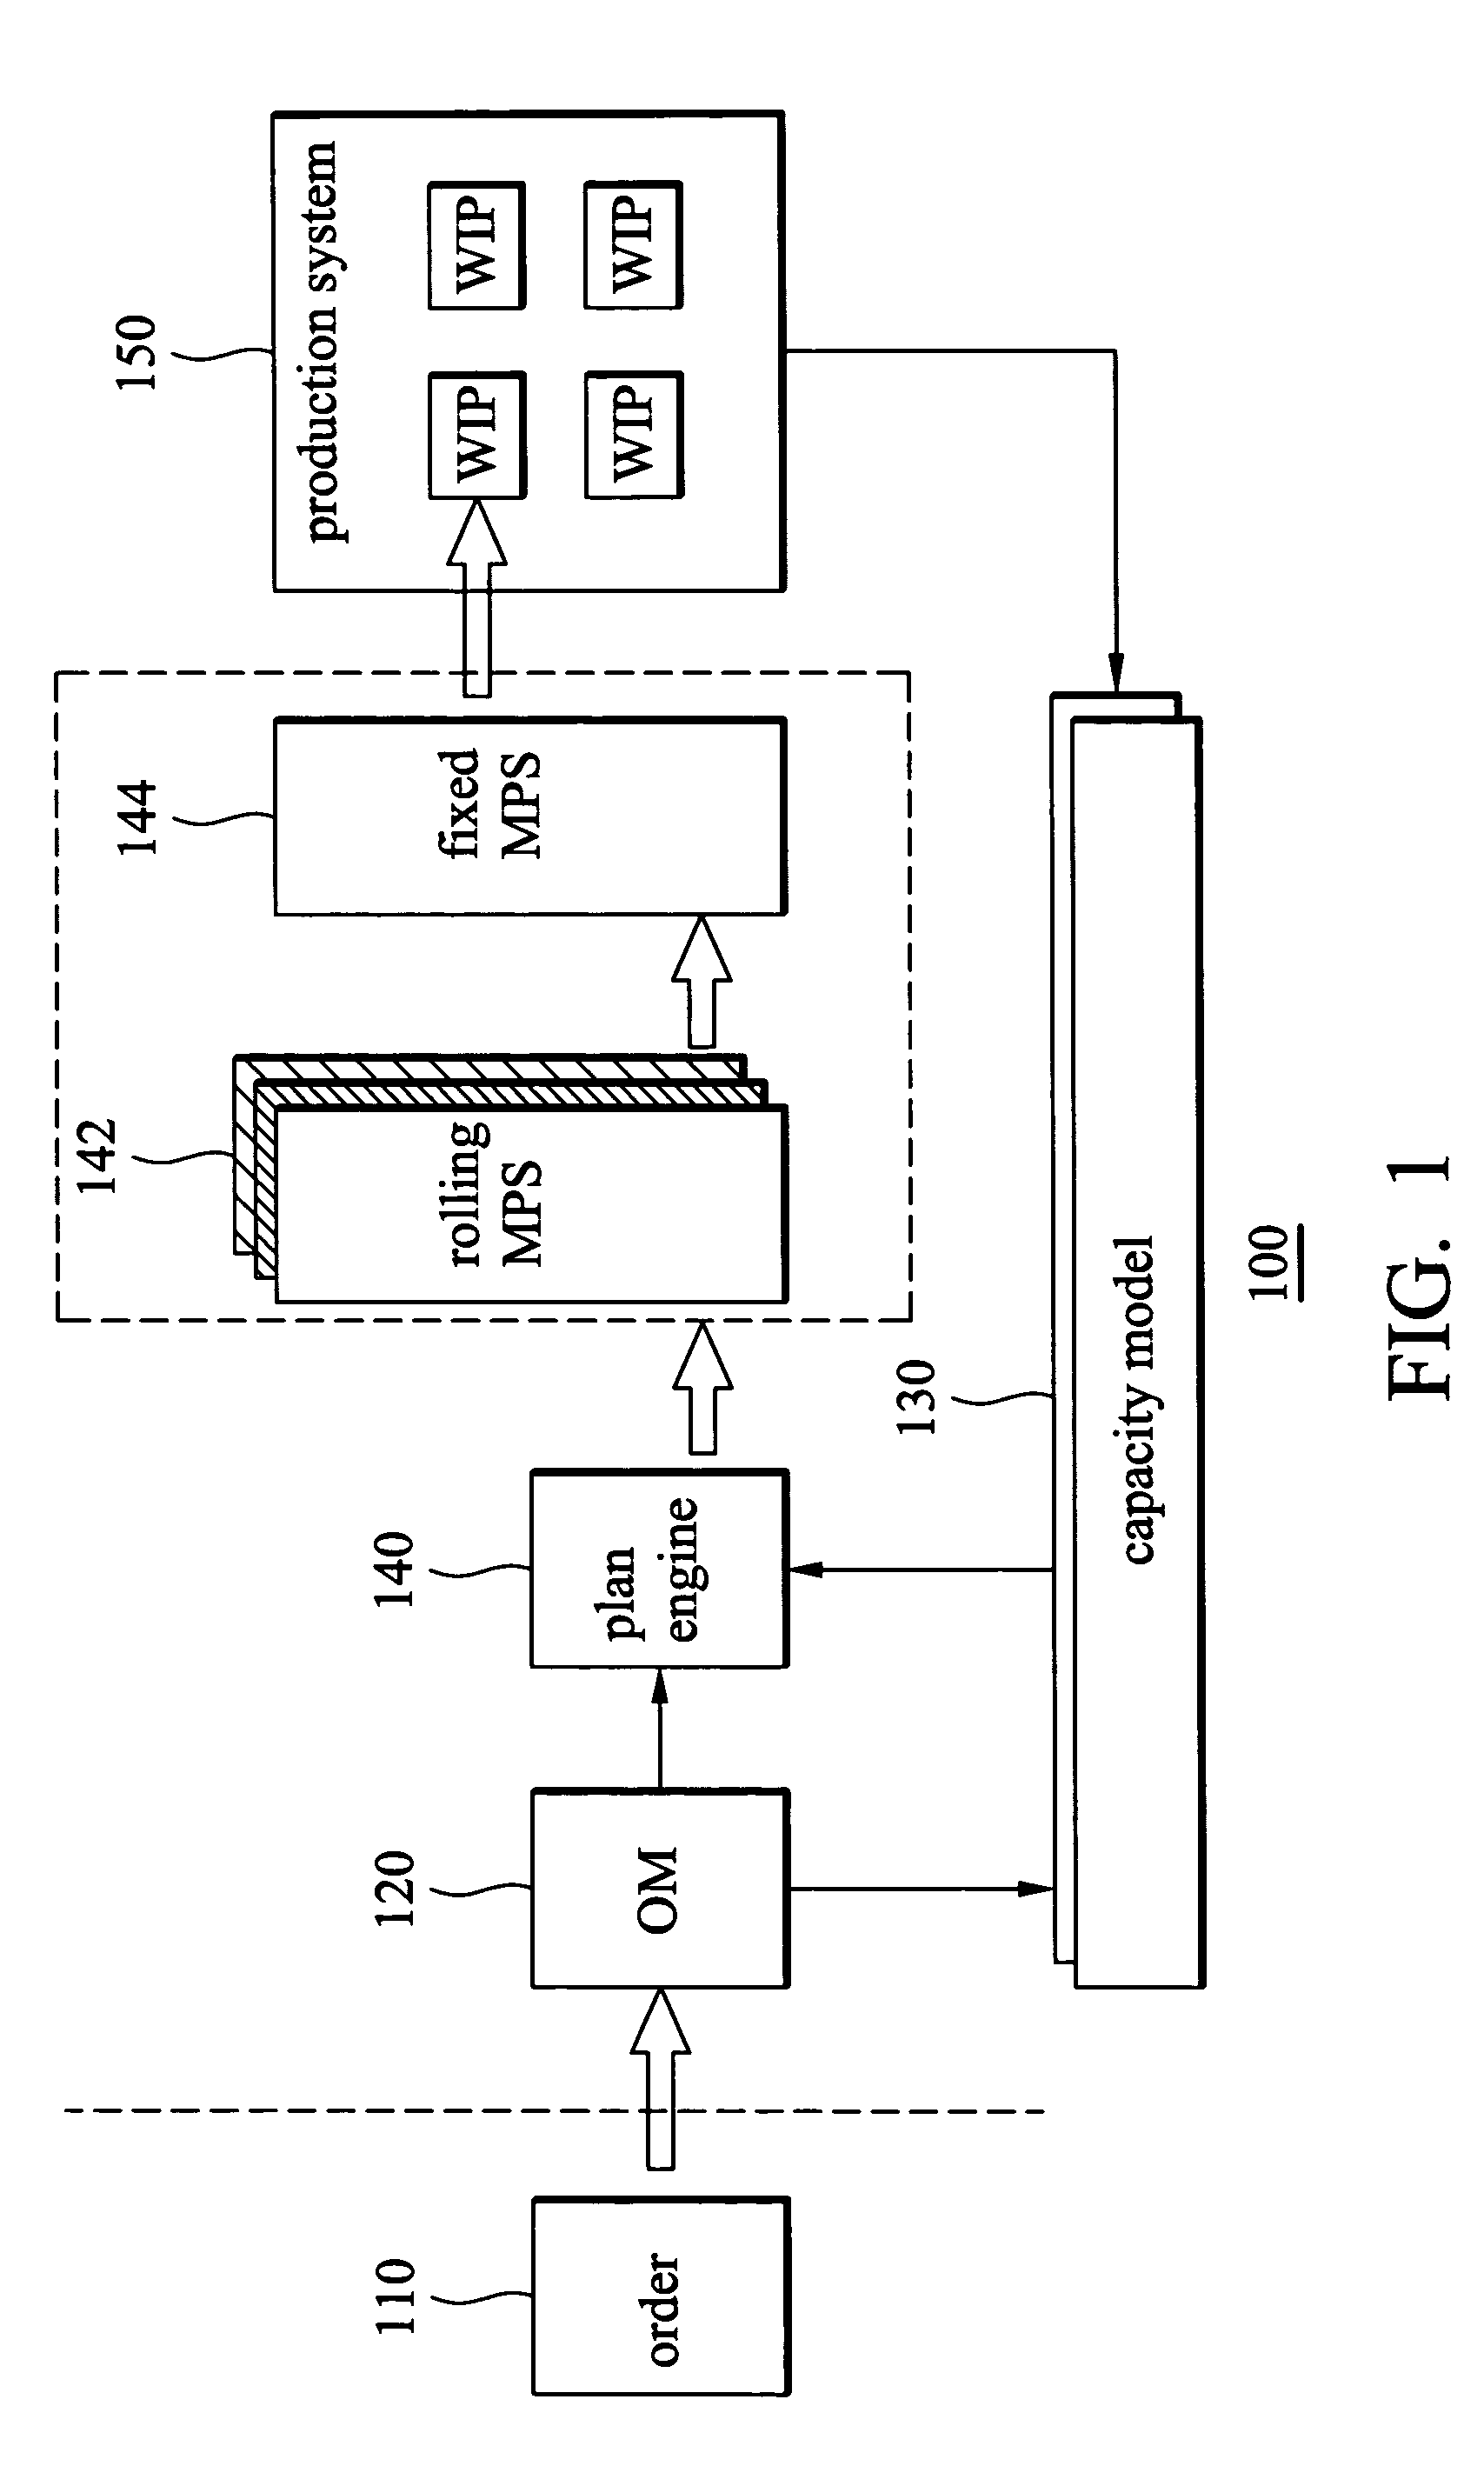 System and method for manufacturing planning and control